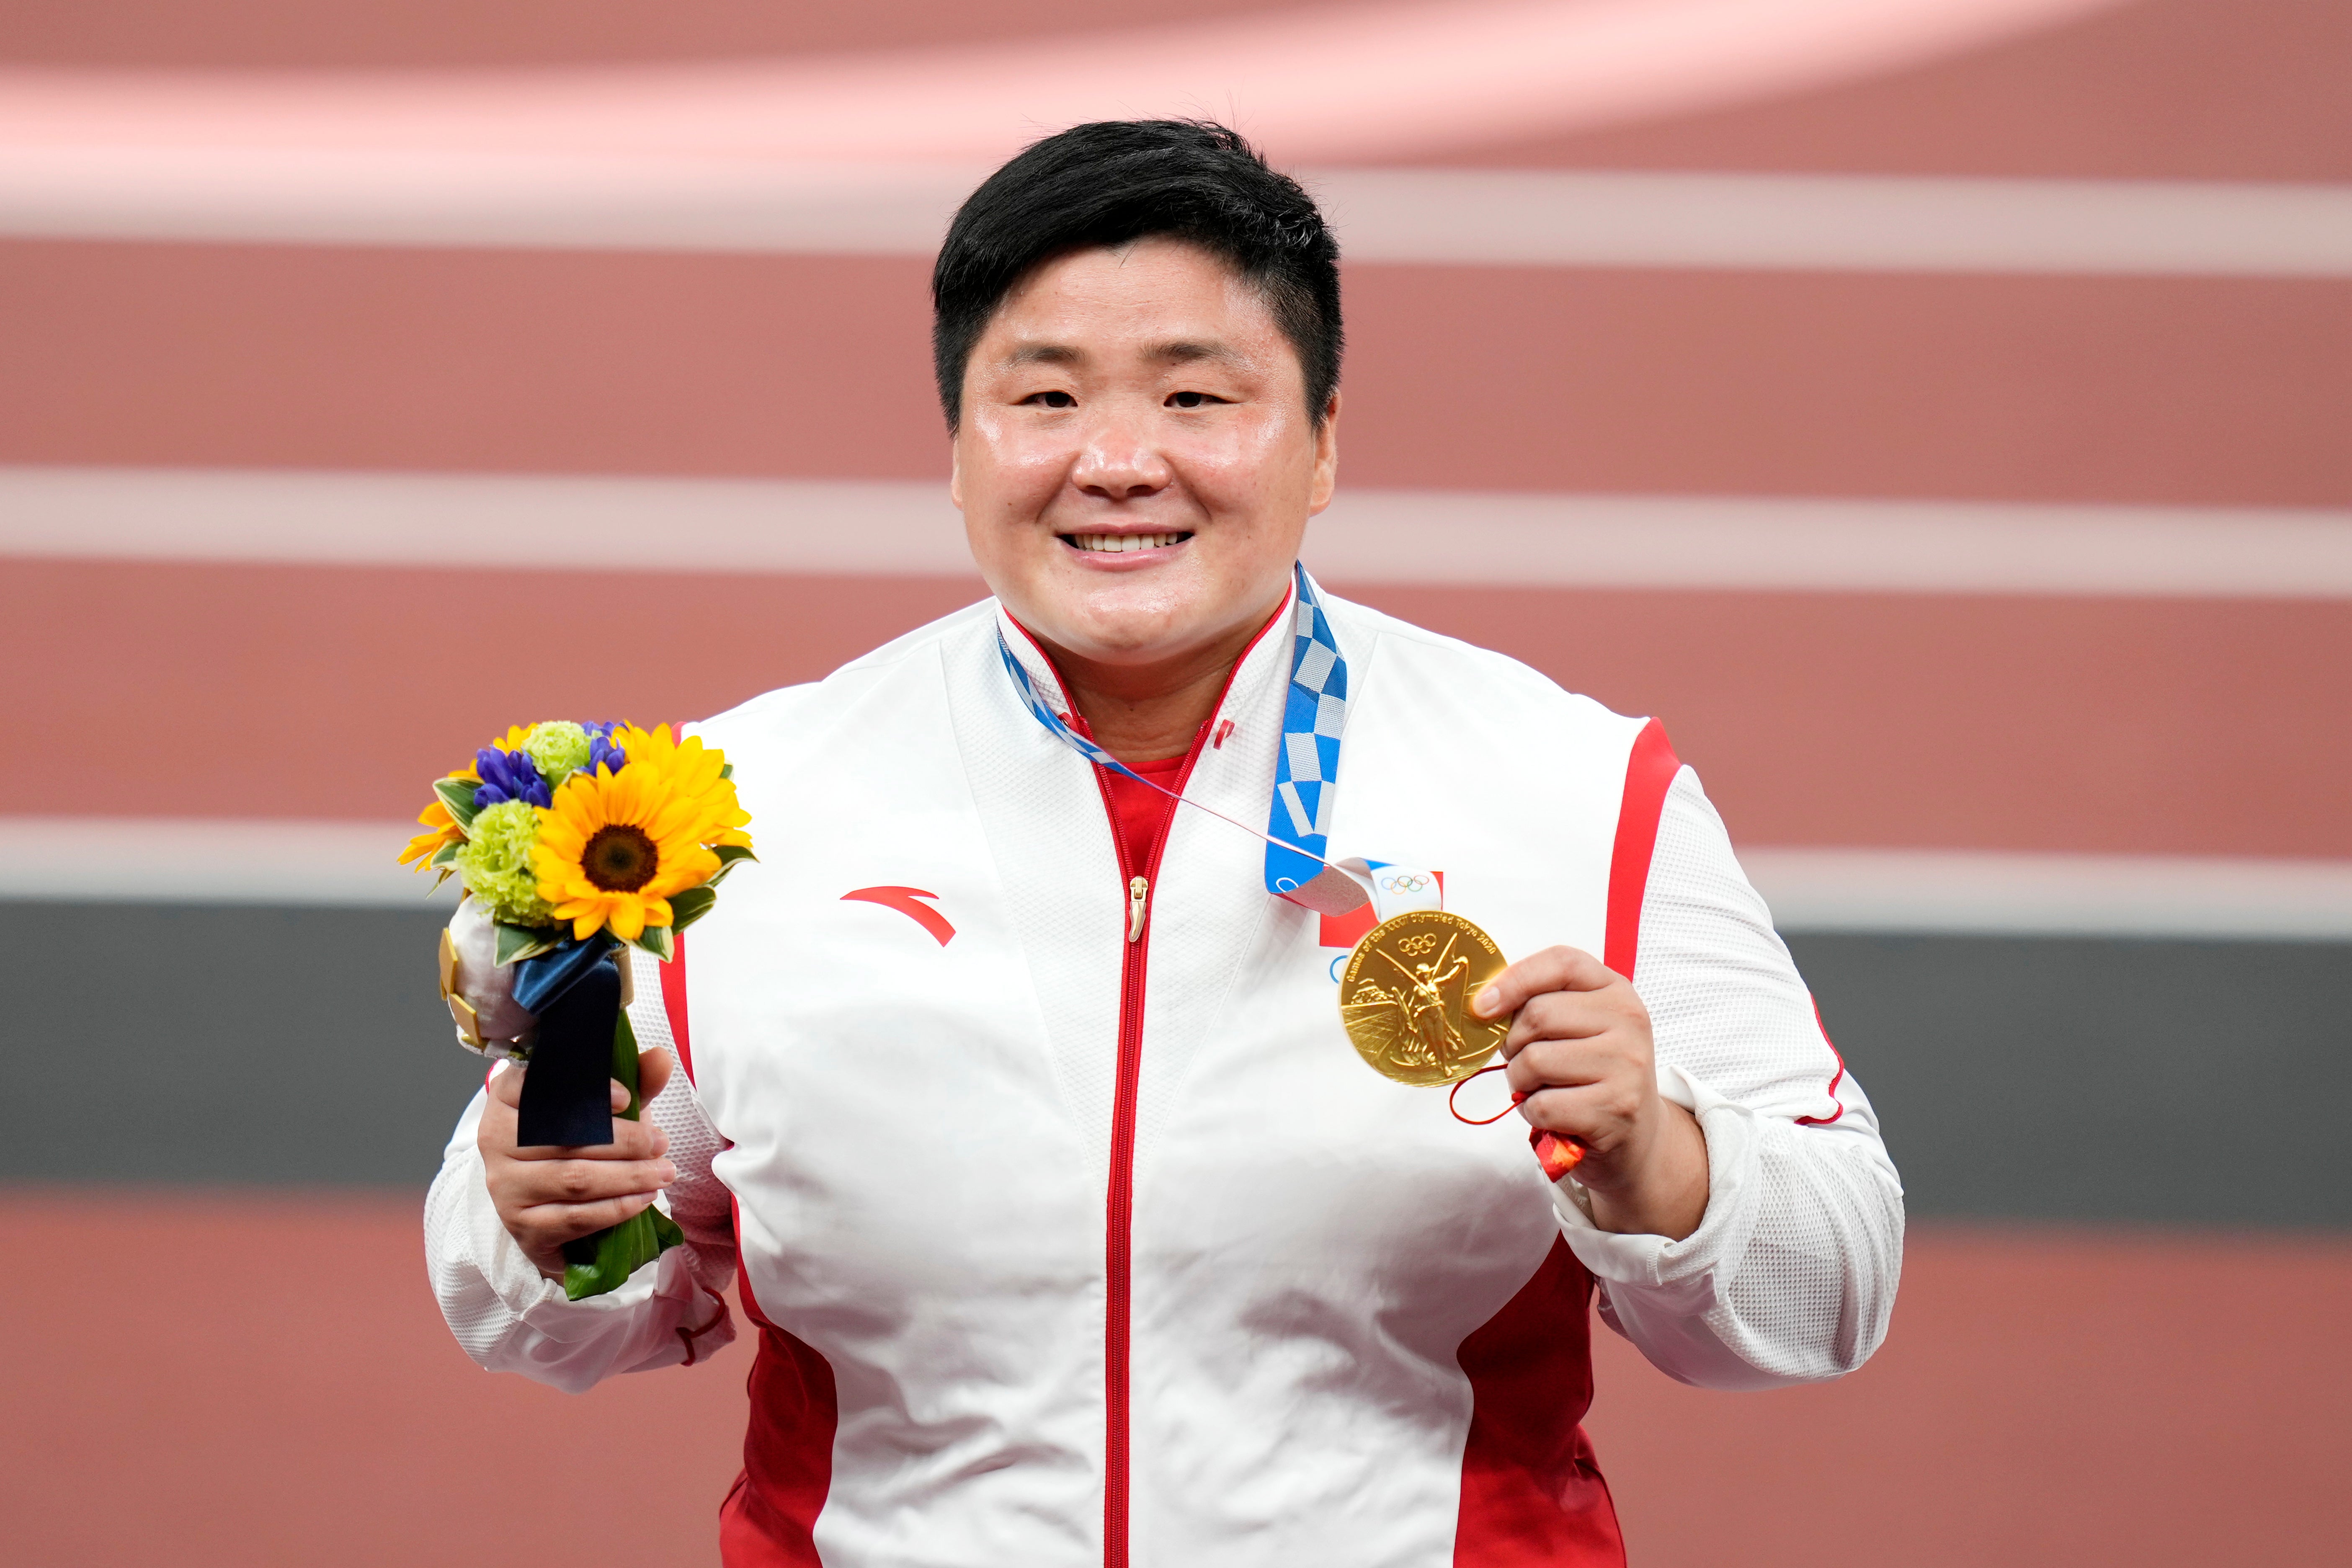 Gold medalist Lijiao Gong of China is seen during the medal ceremony for the women's shot put during the athletics events of the Tokyo 2020 Olympic Games at the Olympic Stadium in Tokyo, Japan, 1 August 2021